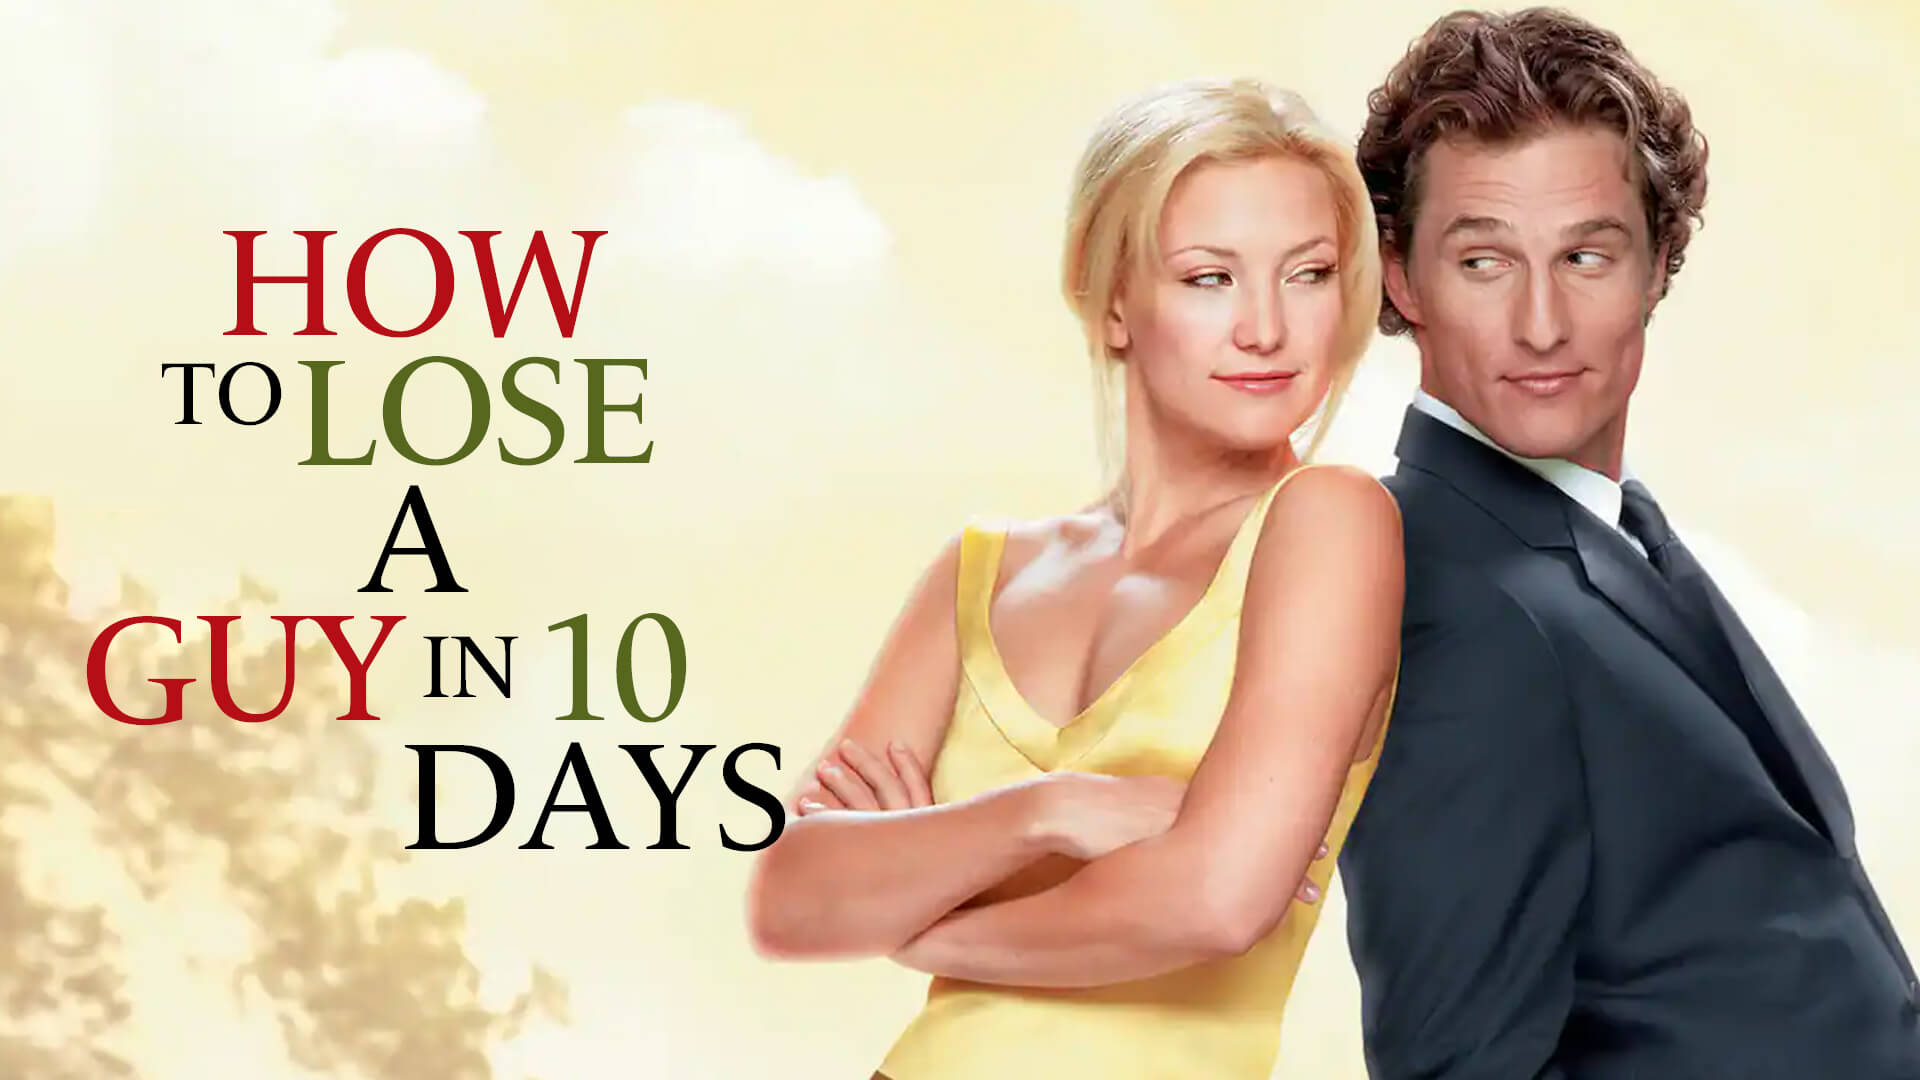 How-to-Lose-a-Guy-in-10-Days-in-Italy-best-movie